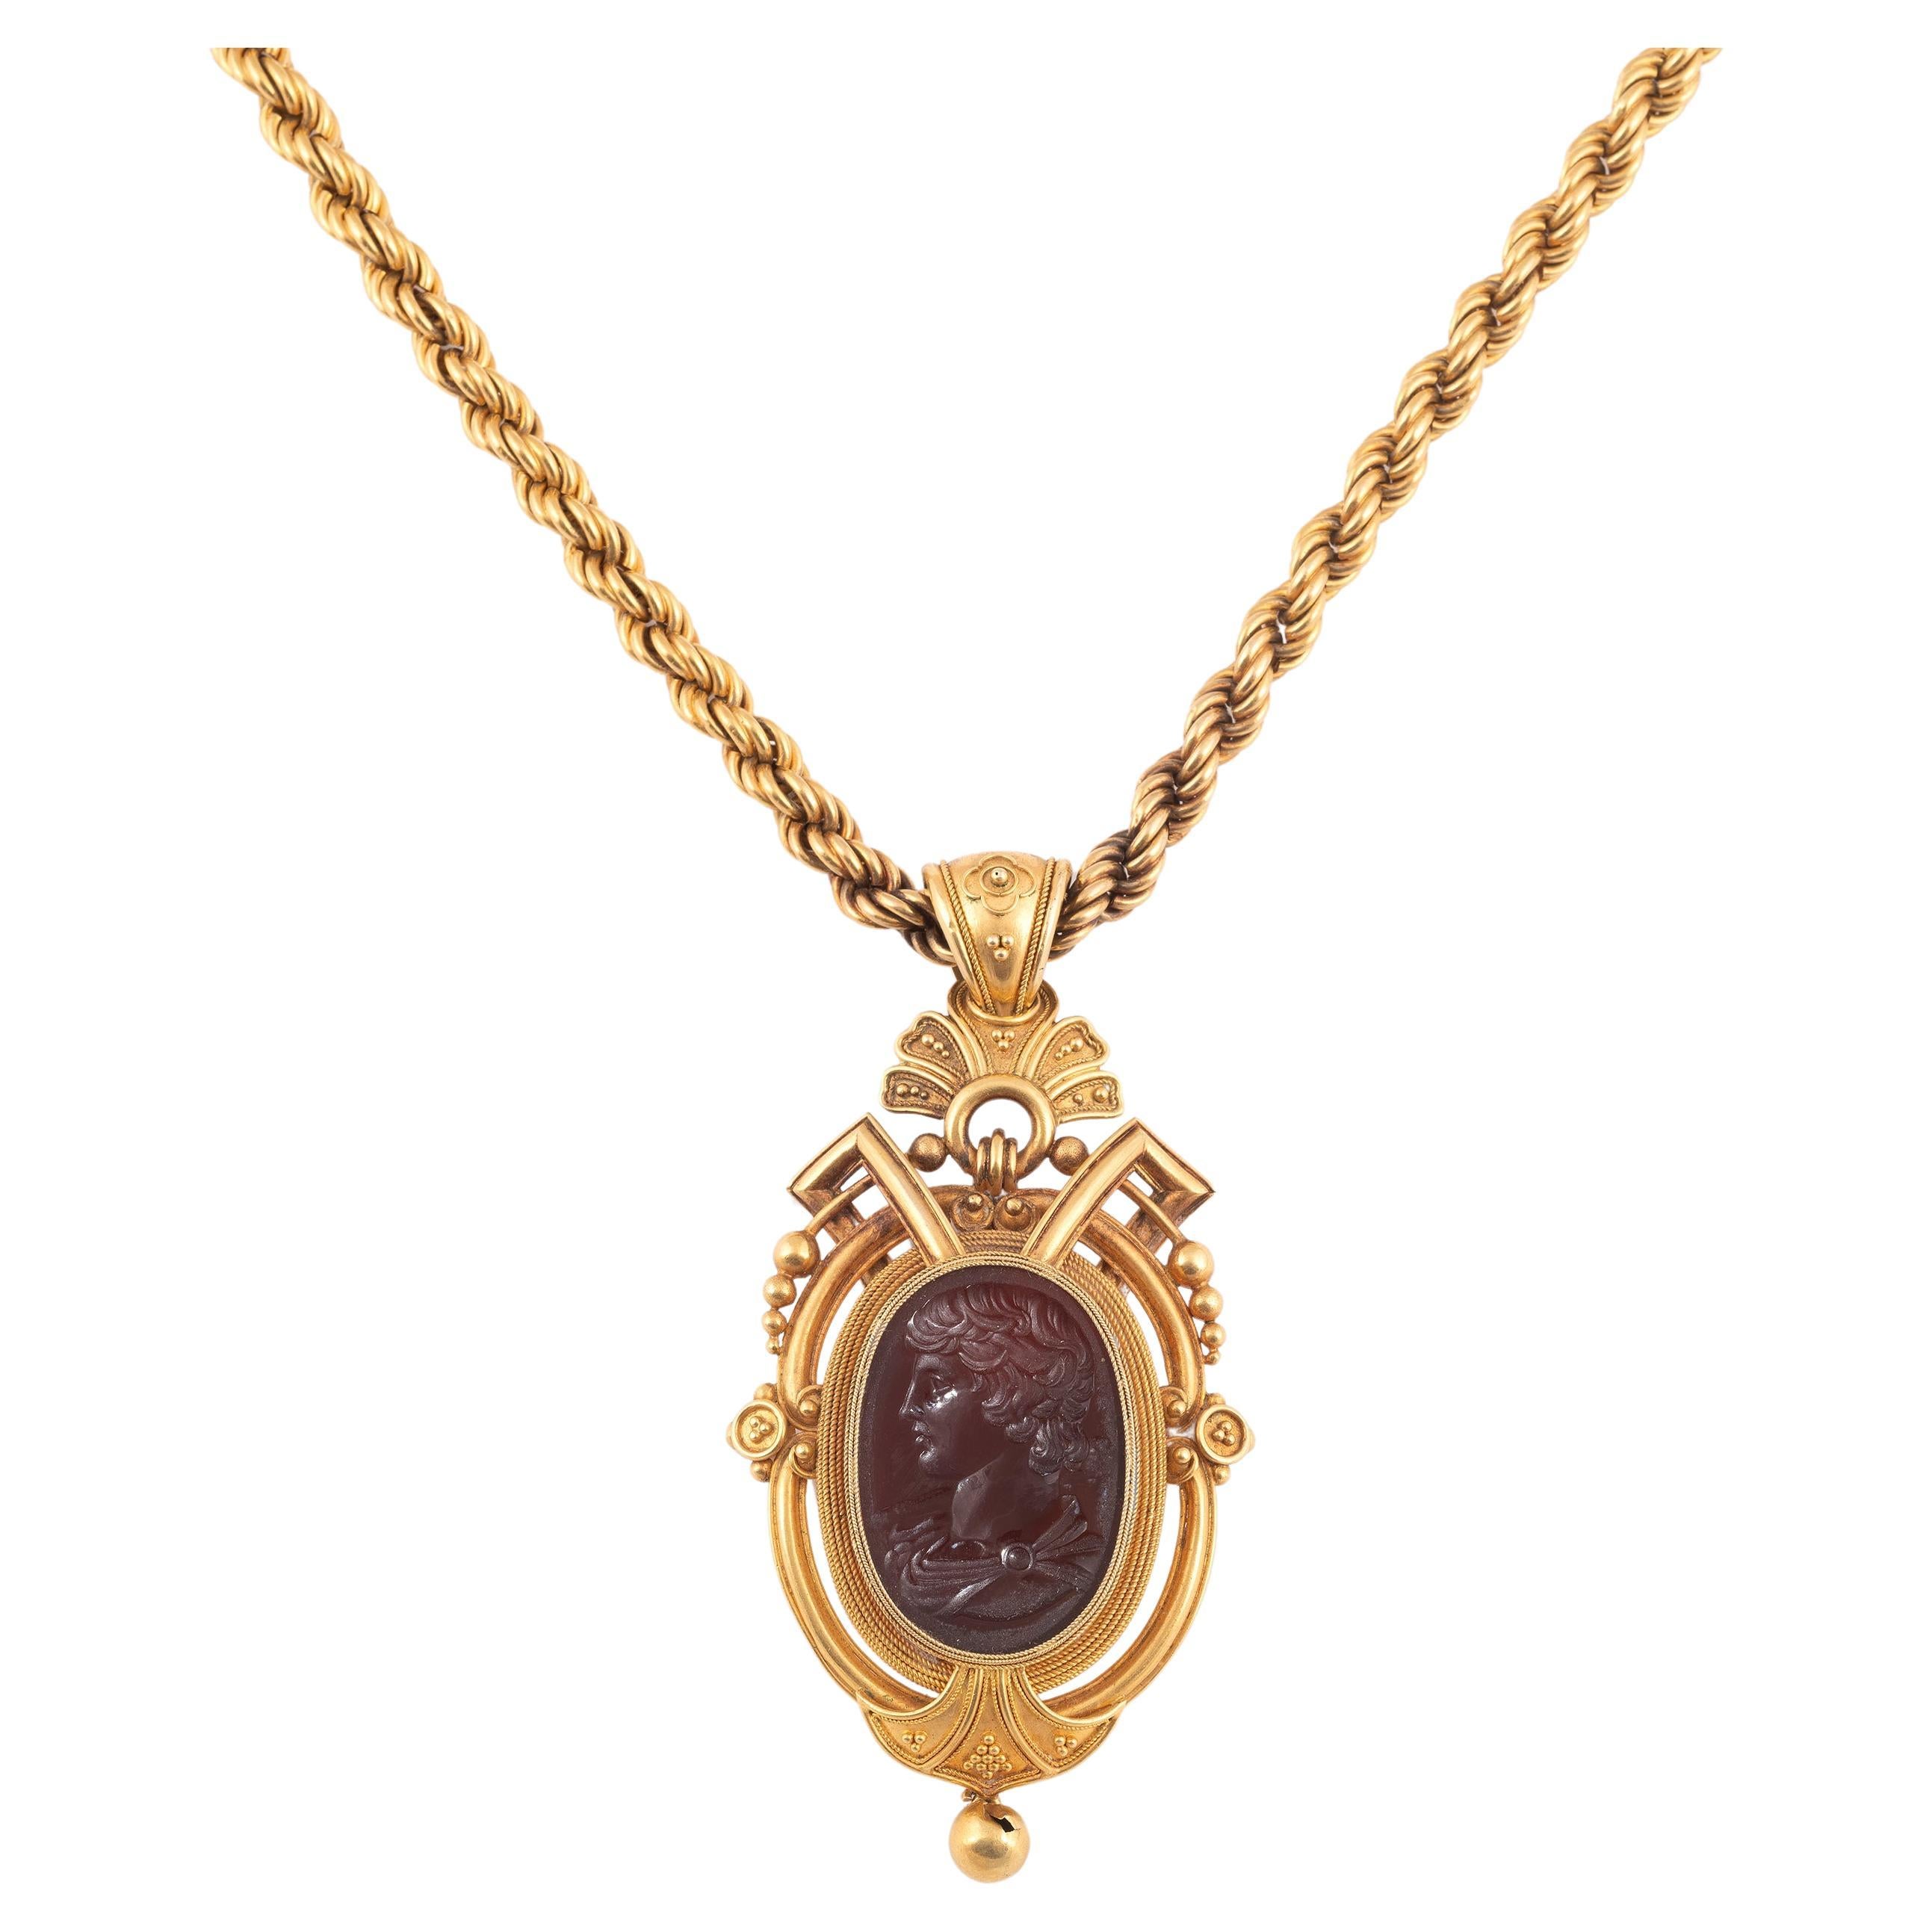 Uncut An Archaeological Revival Gold And Agate Intaglio Necklace Circa 1850 For Sale